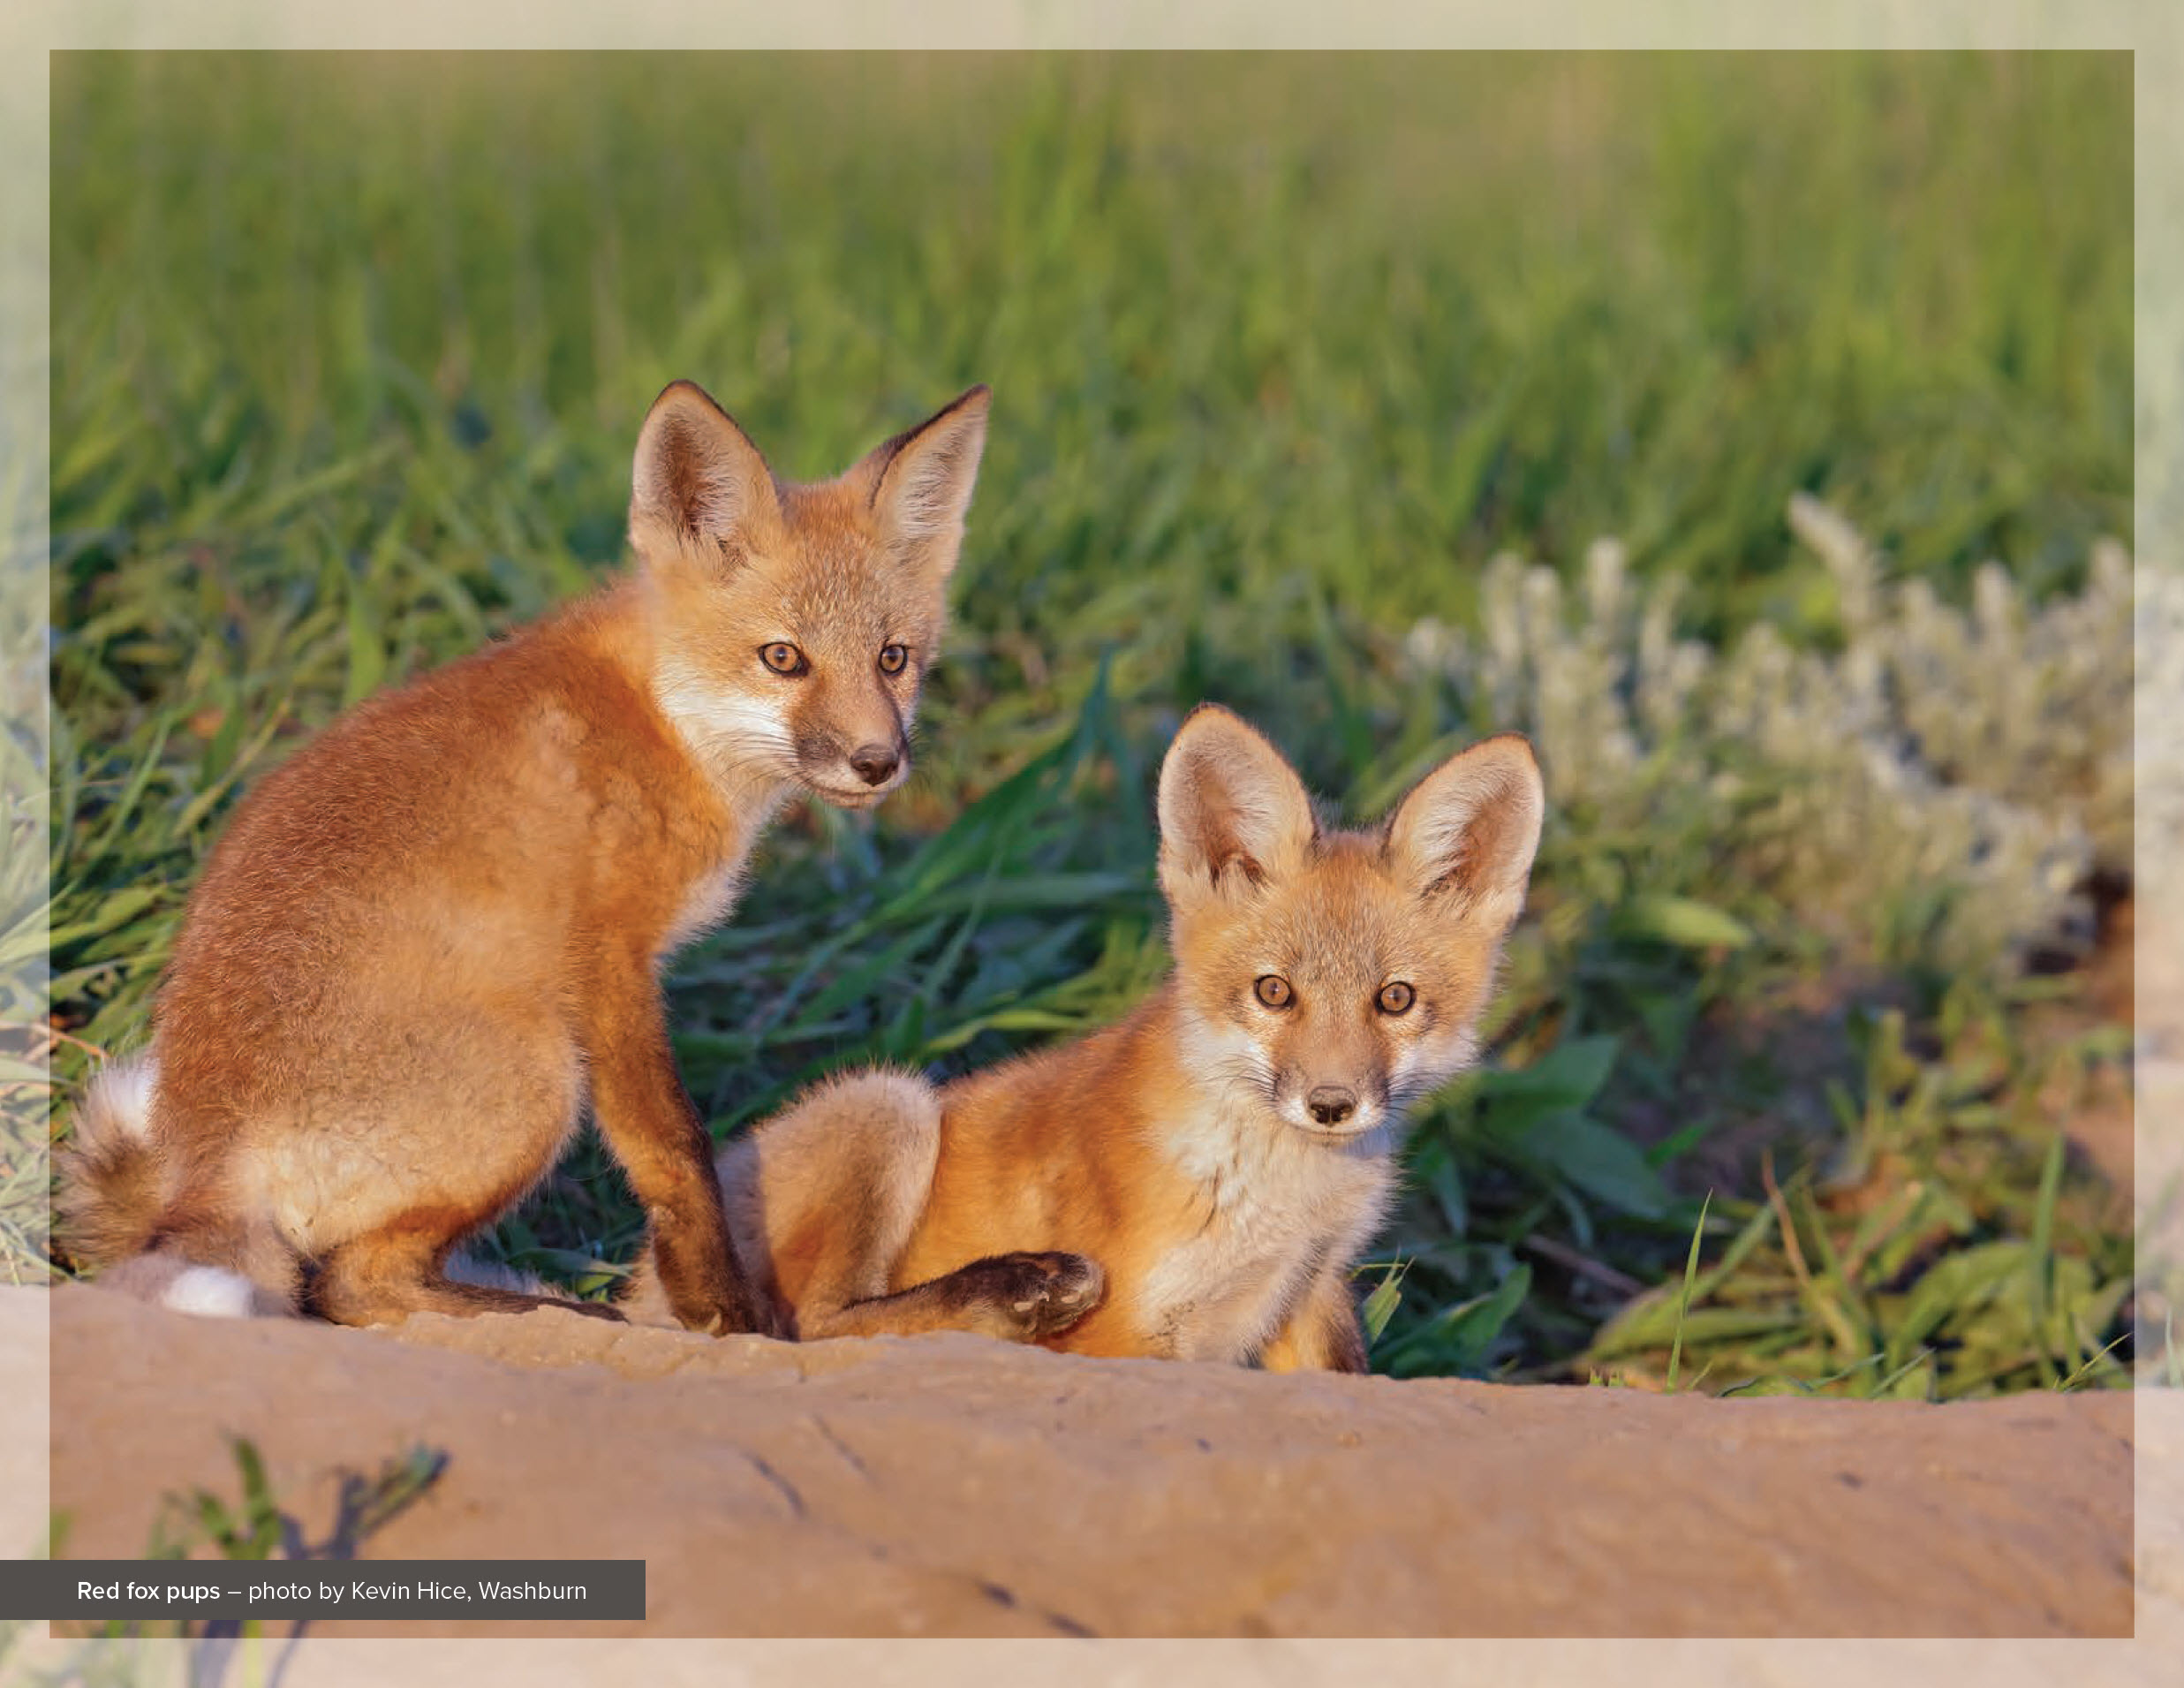 Red fox pups – photo by Kevin Hice, Washburn